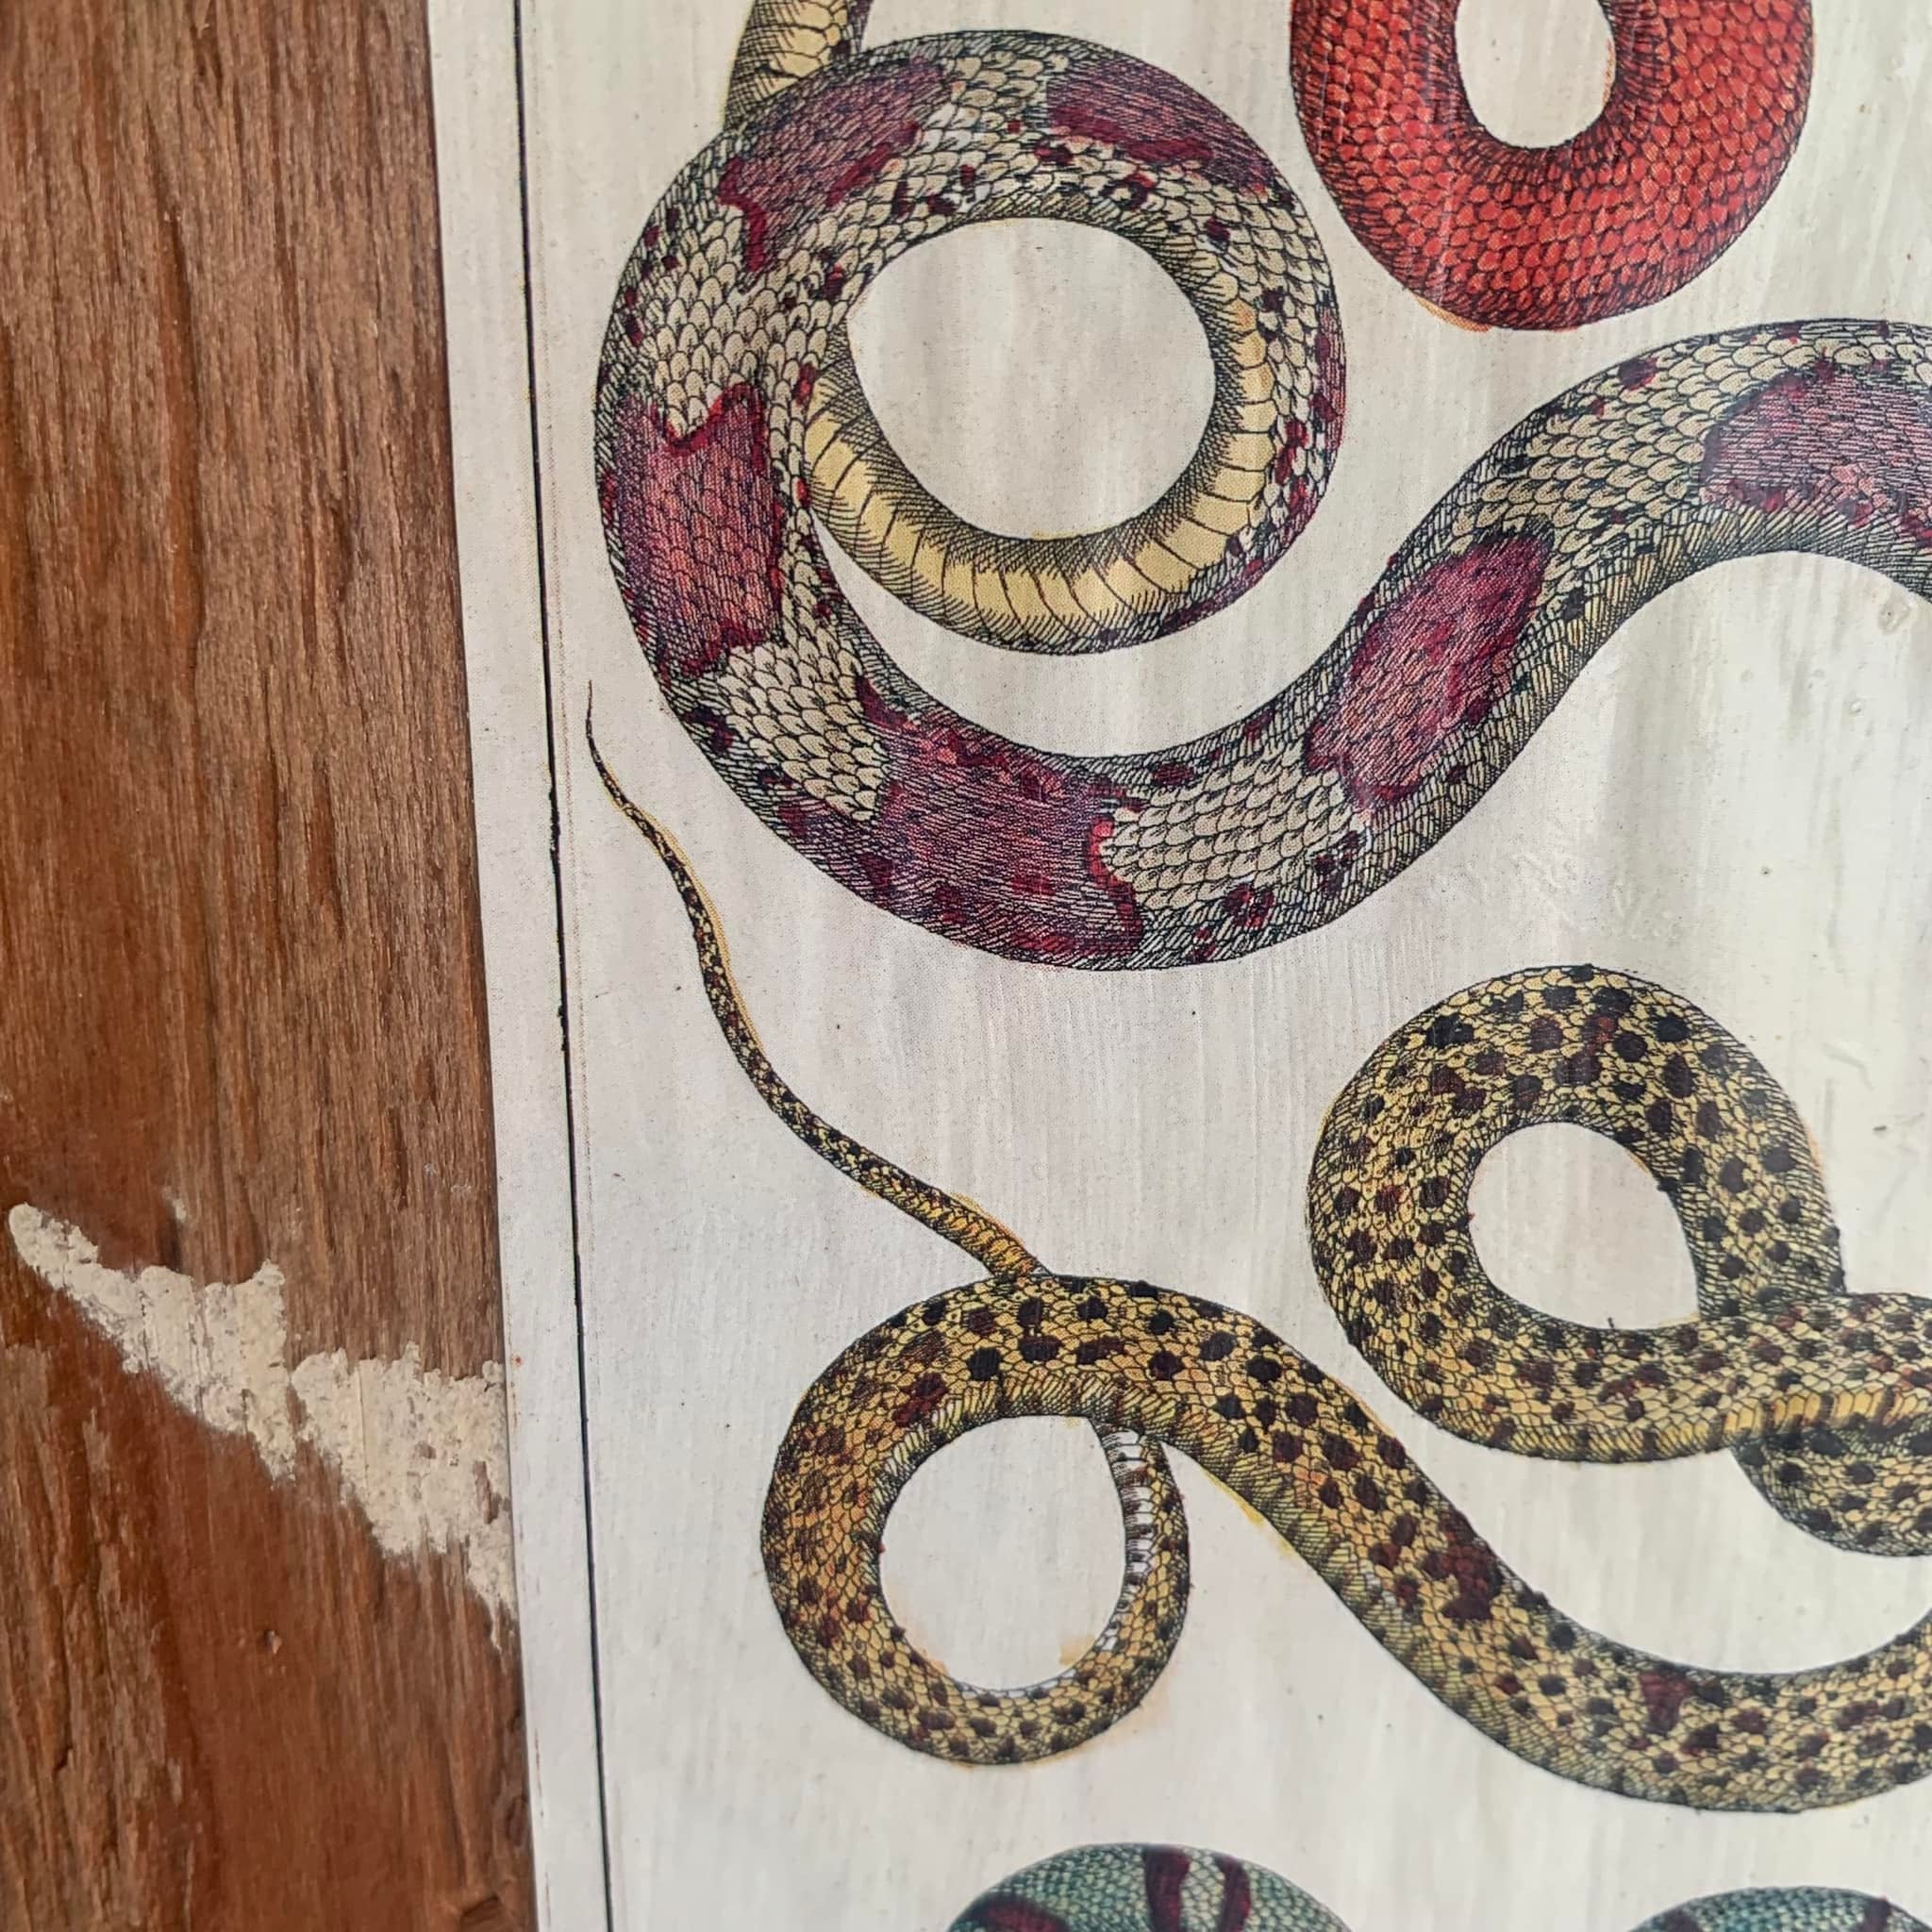 Cabinet Print, Snakes